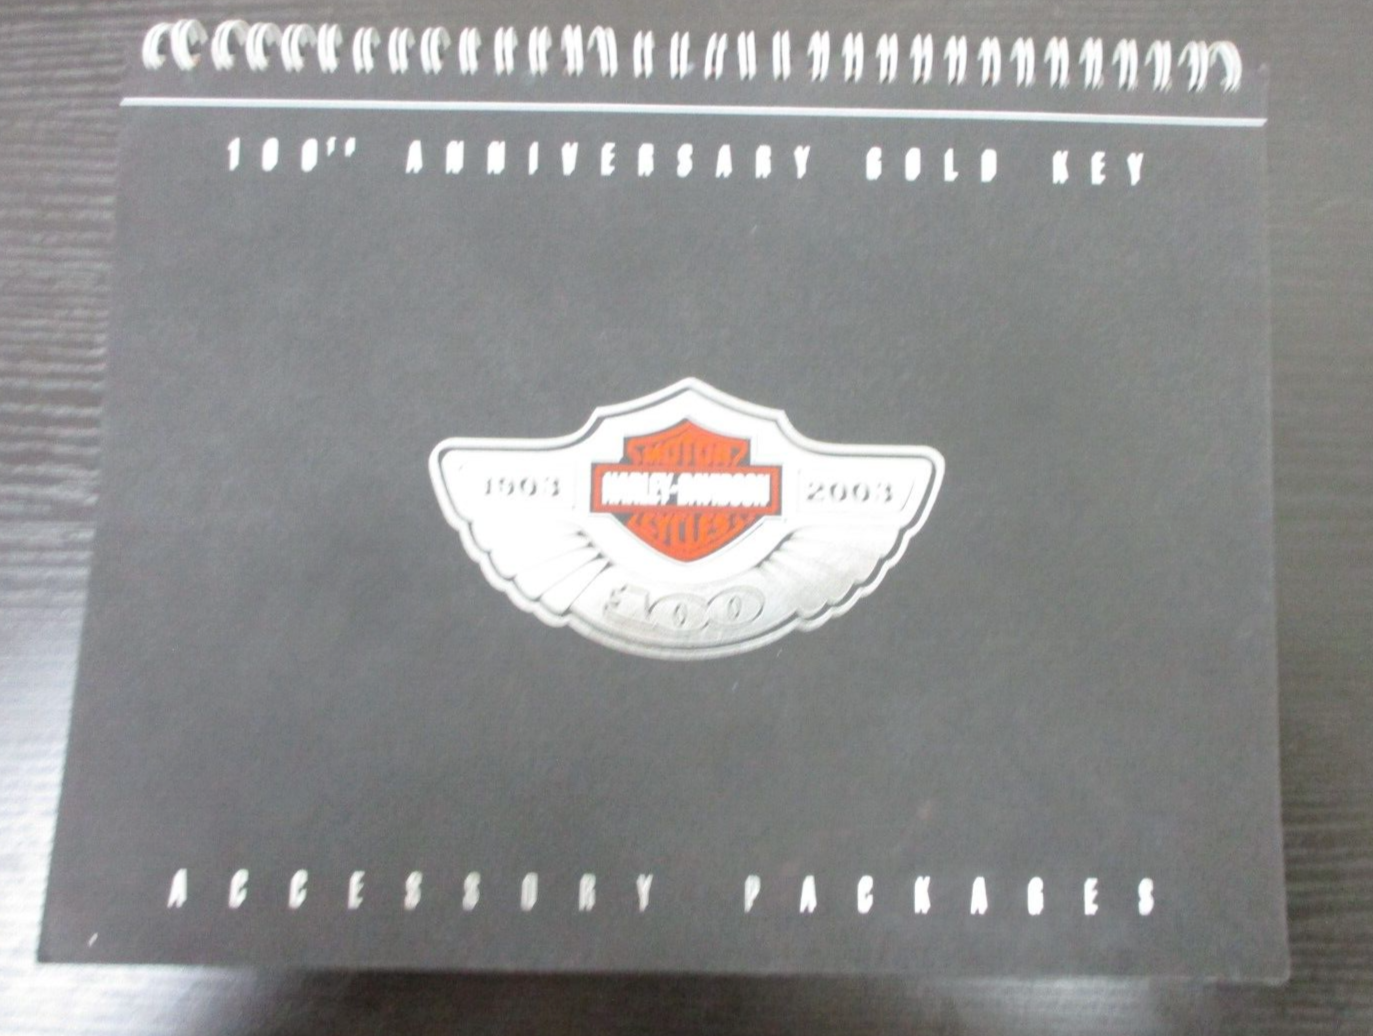 Harley-Davidson 1903-2003 100th Anniversary Accessory Packages